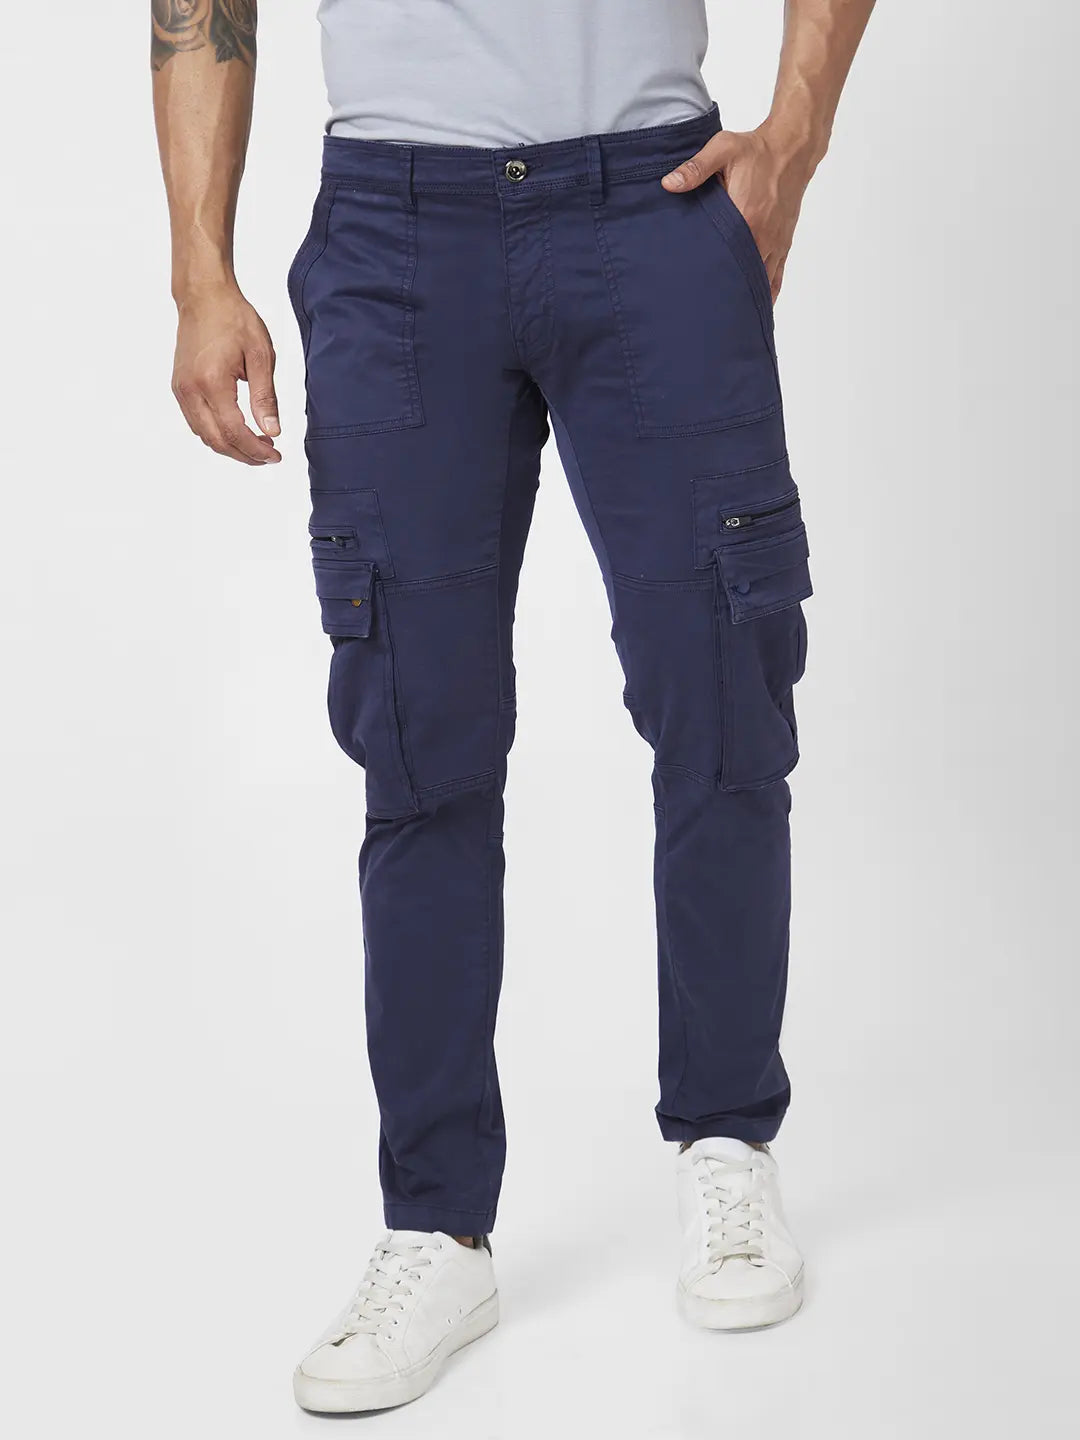 Buy Navy Blue Ribcage Cotton Cargo Pants Online At Best Prices  Tistabene